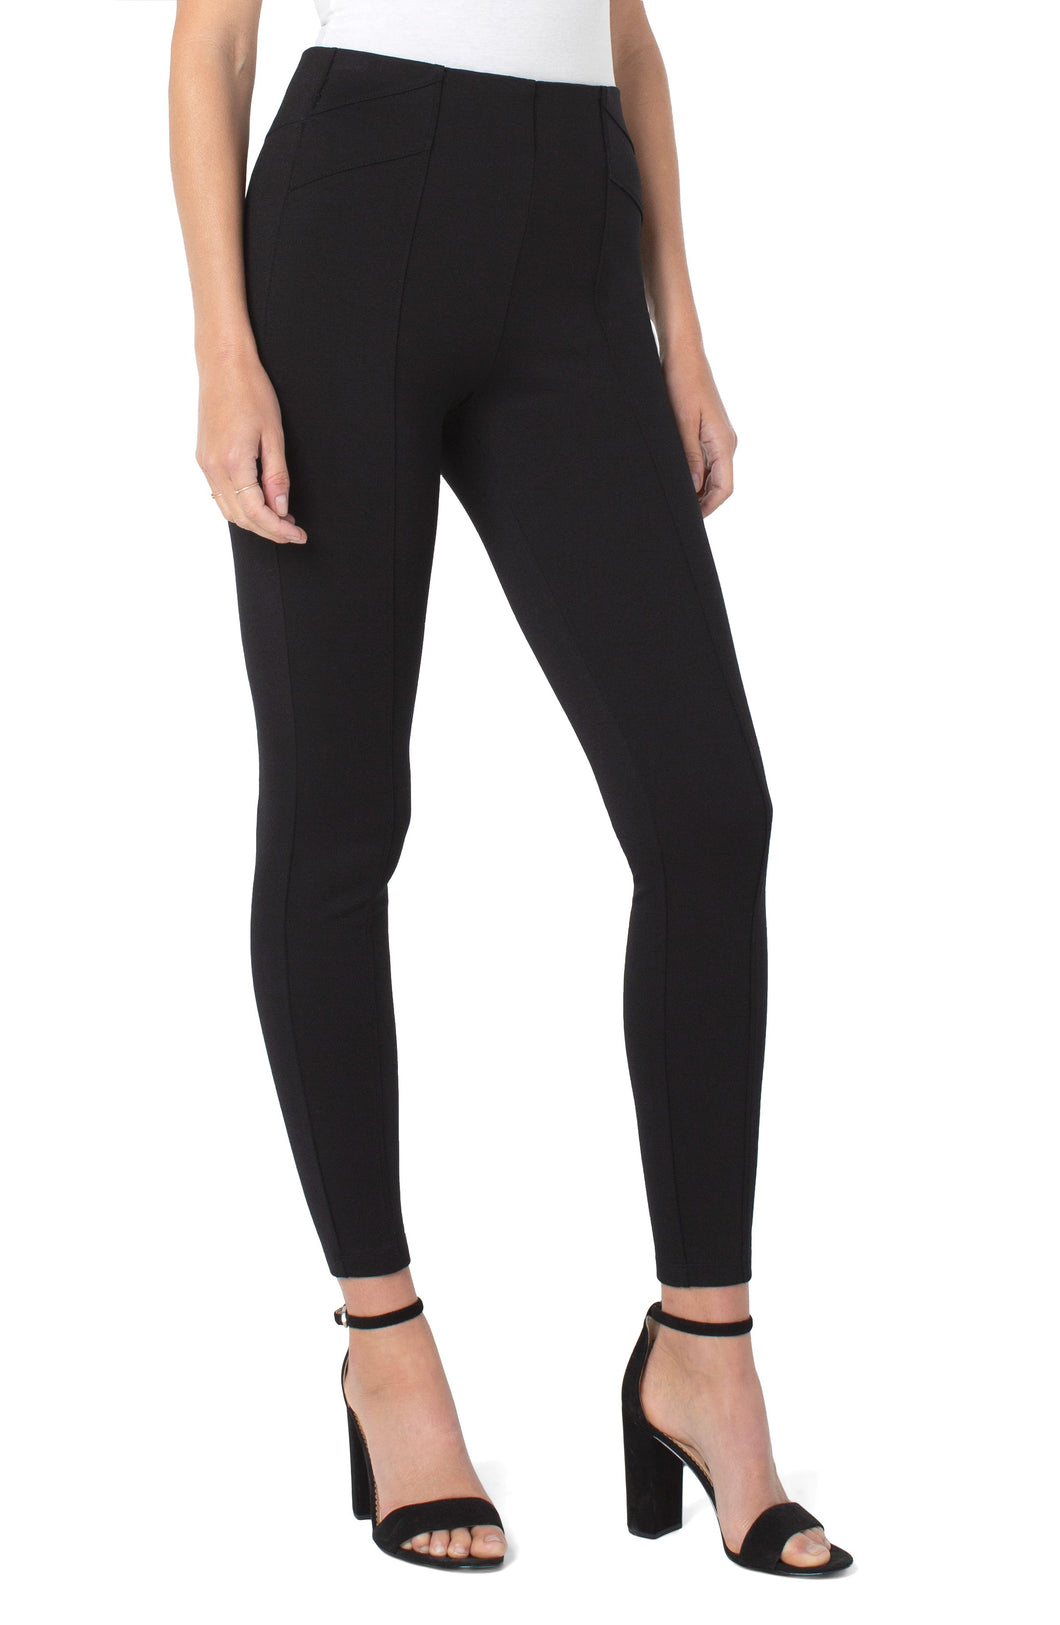 Liverpool's signature hi-rise legging with elongating front seams and an updated double front slant detail is a must have style! Super stretch with amazing recovery prevents this fabulous legging from bagging!  The Reese legging will be the legging you want to live in!  Color- Black. 28'' Inseam. Hi-rise. Seam detailing. Clean, slimming and sophisticated silhouette